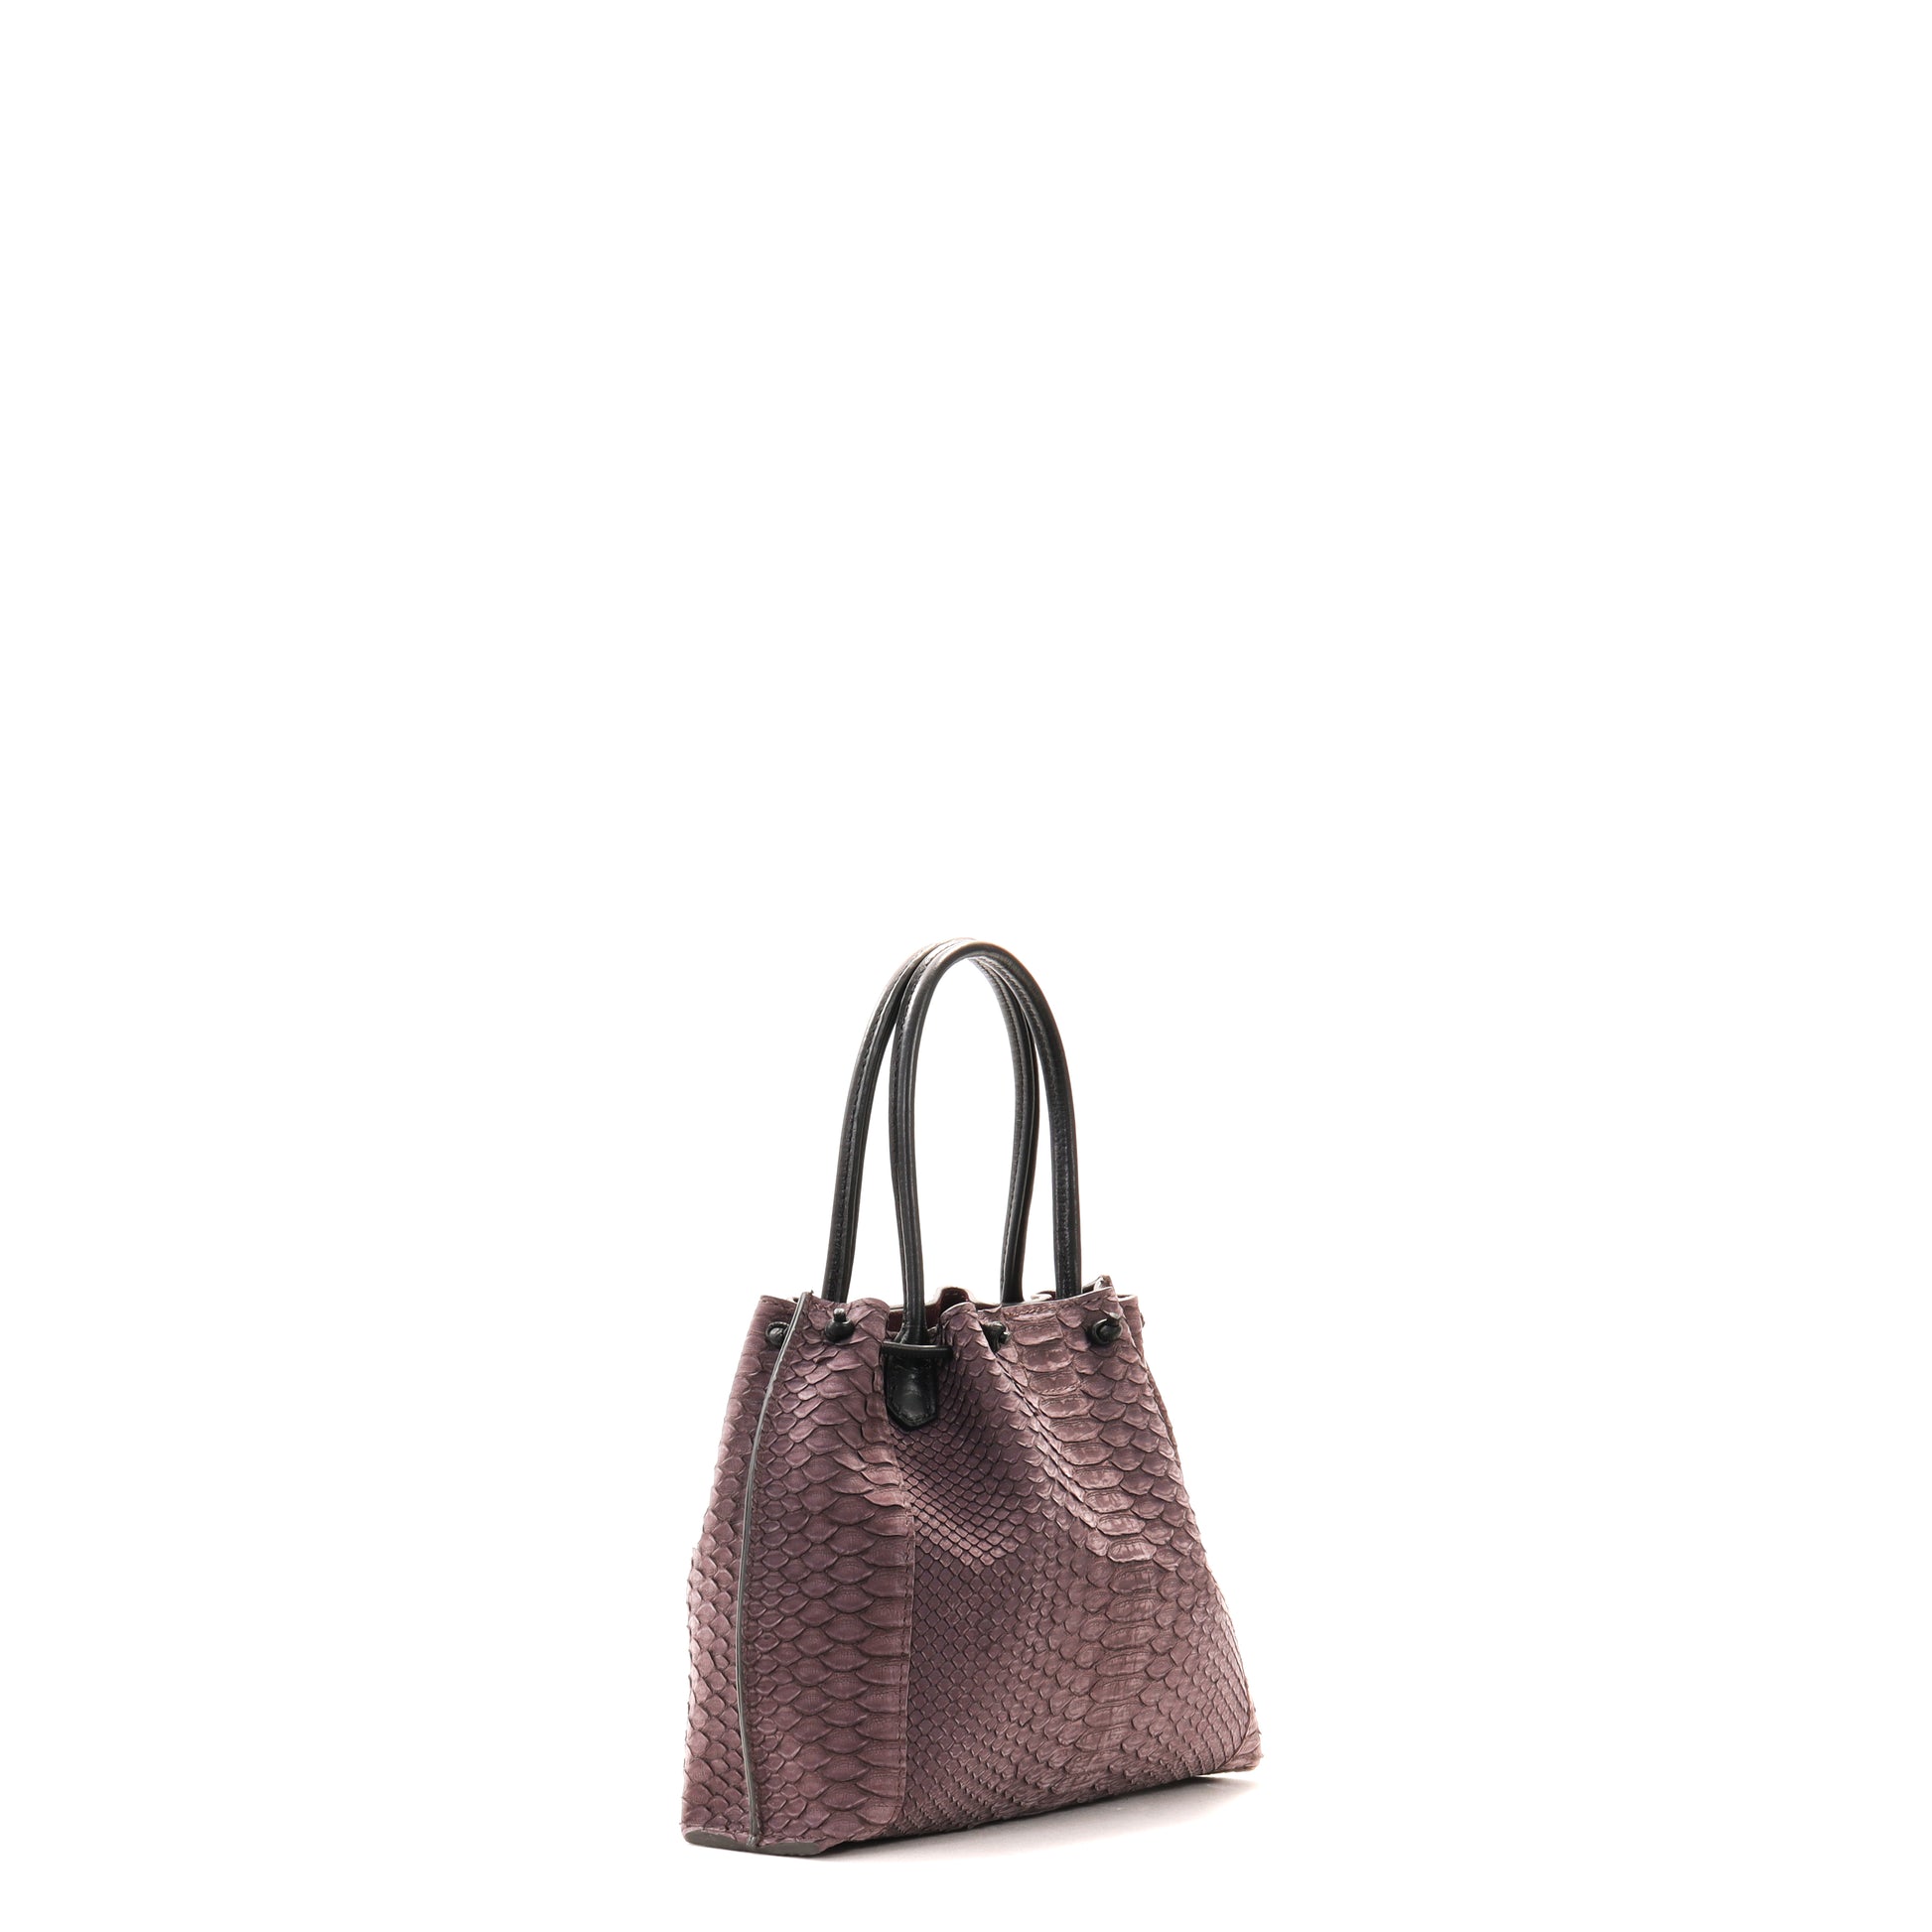 Leather Handbag With Python Pattern for Women Handmade -  Norway